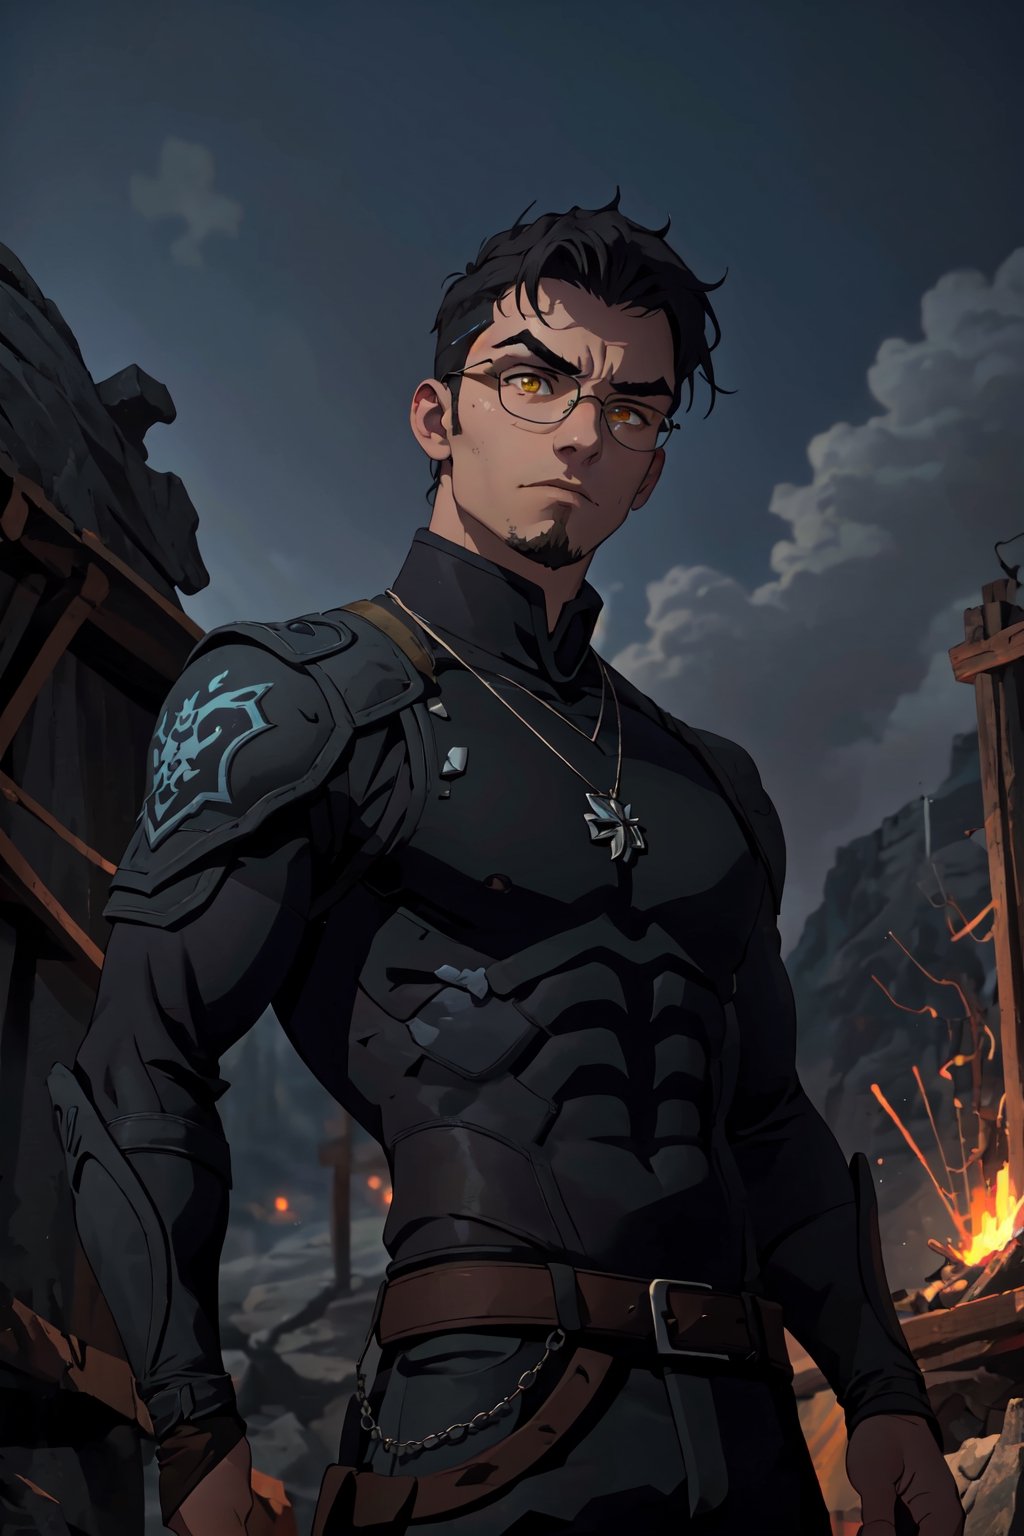 ((masterpiece)), ((1boy)), young man 23 years old, short black hair, ((small thick eyebrows)), old but cool glasses, clothes of the character Gerald de Ridea, metal necklace of a wolf, body thin but masculine, warrior facial expression, apocalyptic fantasy landscape, science fiction, cinematic blur, dynamic lights.,witcher, (iris of the yellow eyes) 